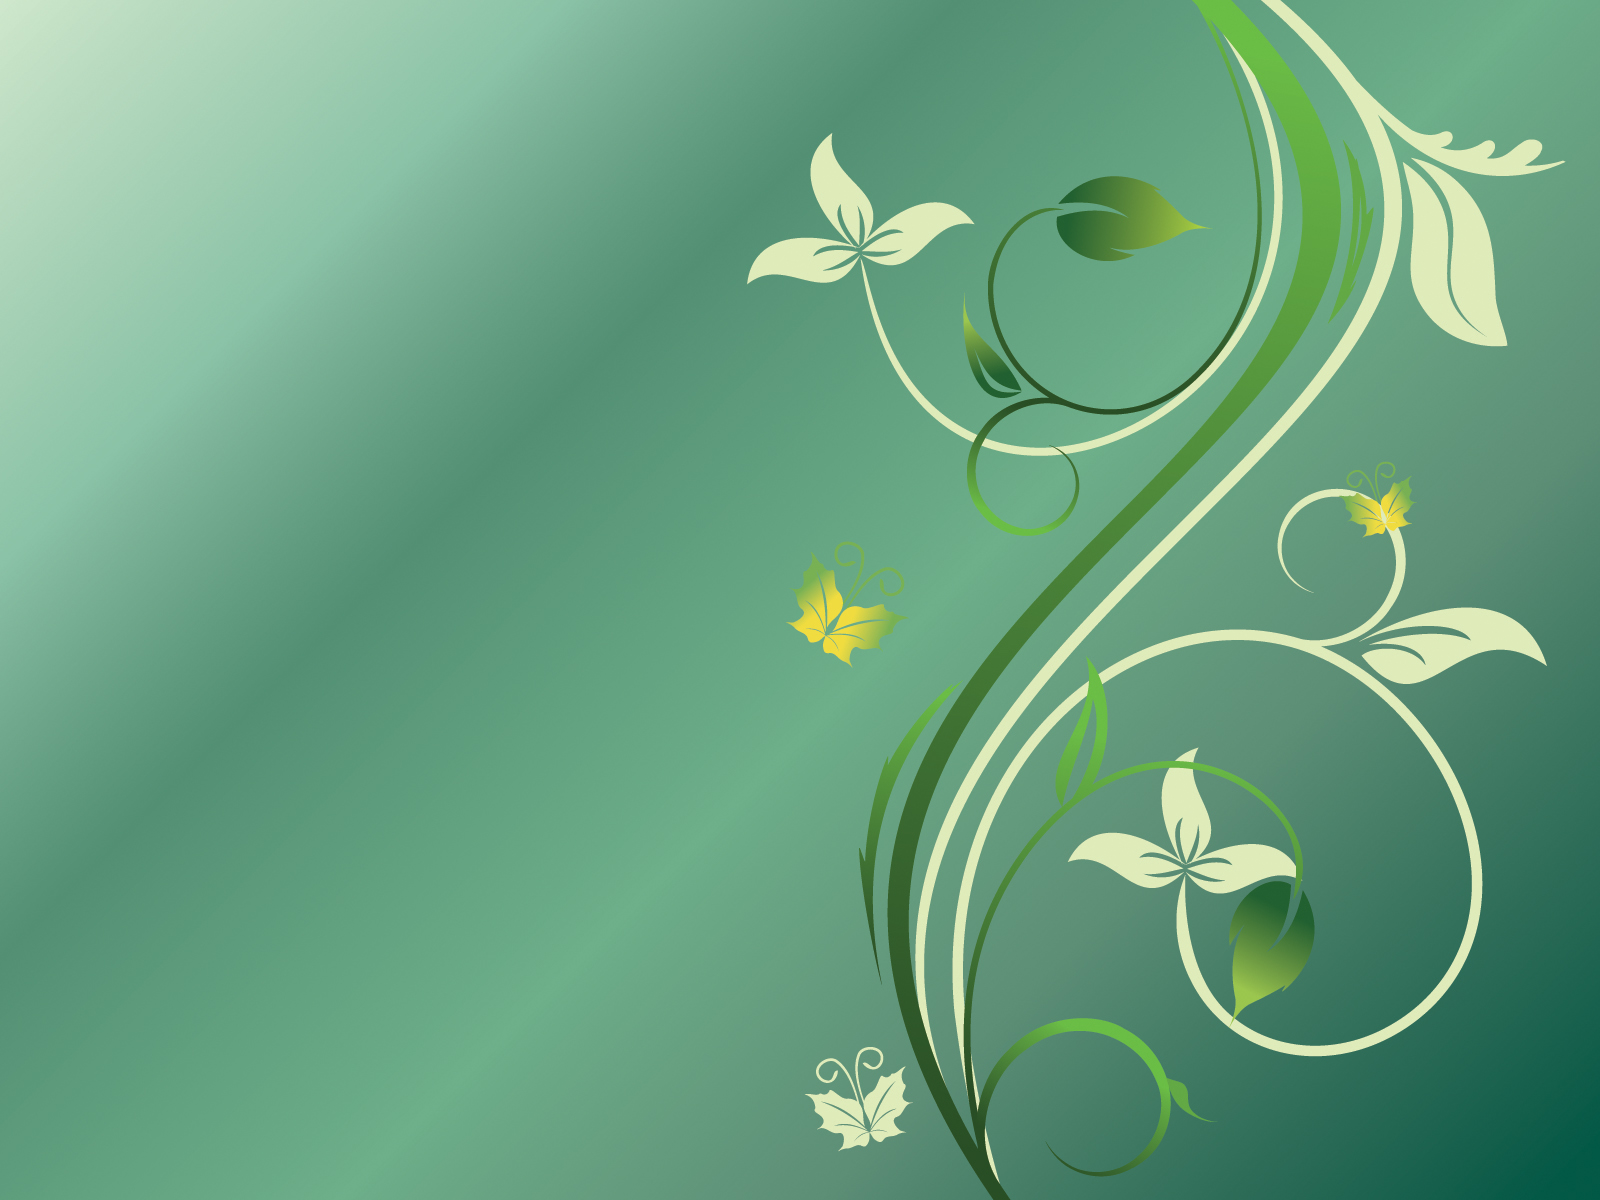 Green, Leaves, Lines Powerpoint Templates - Abstract, Green, Lime, Orange,  White - Free PPT Backgrounds and Templates